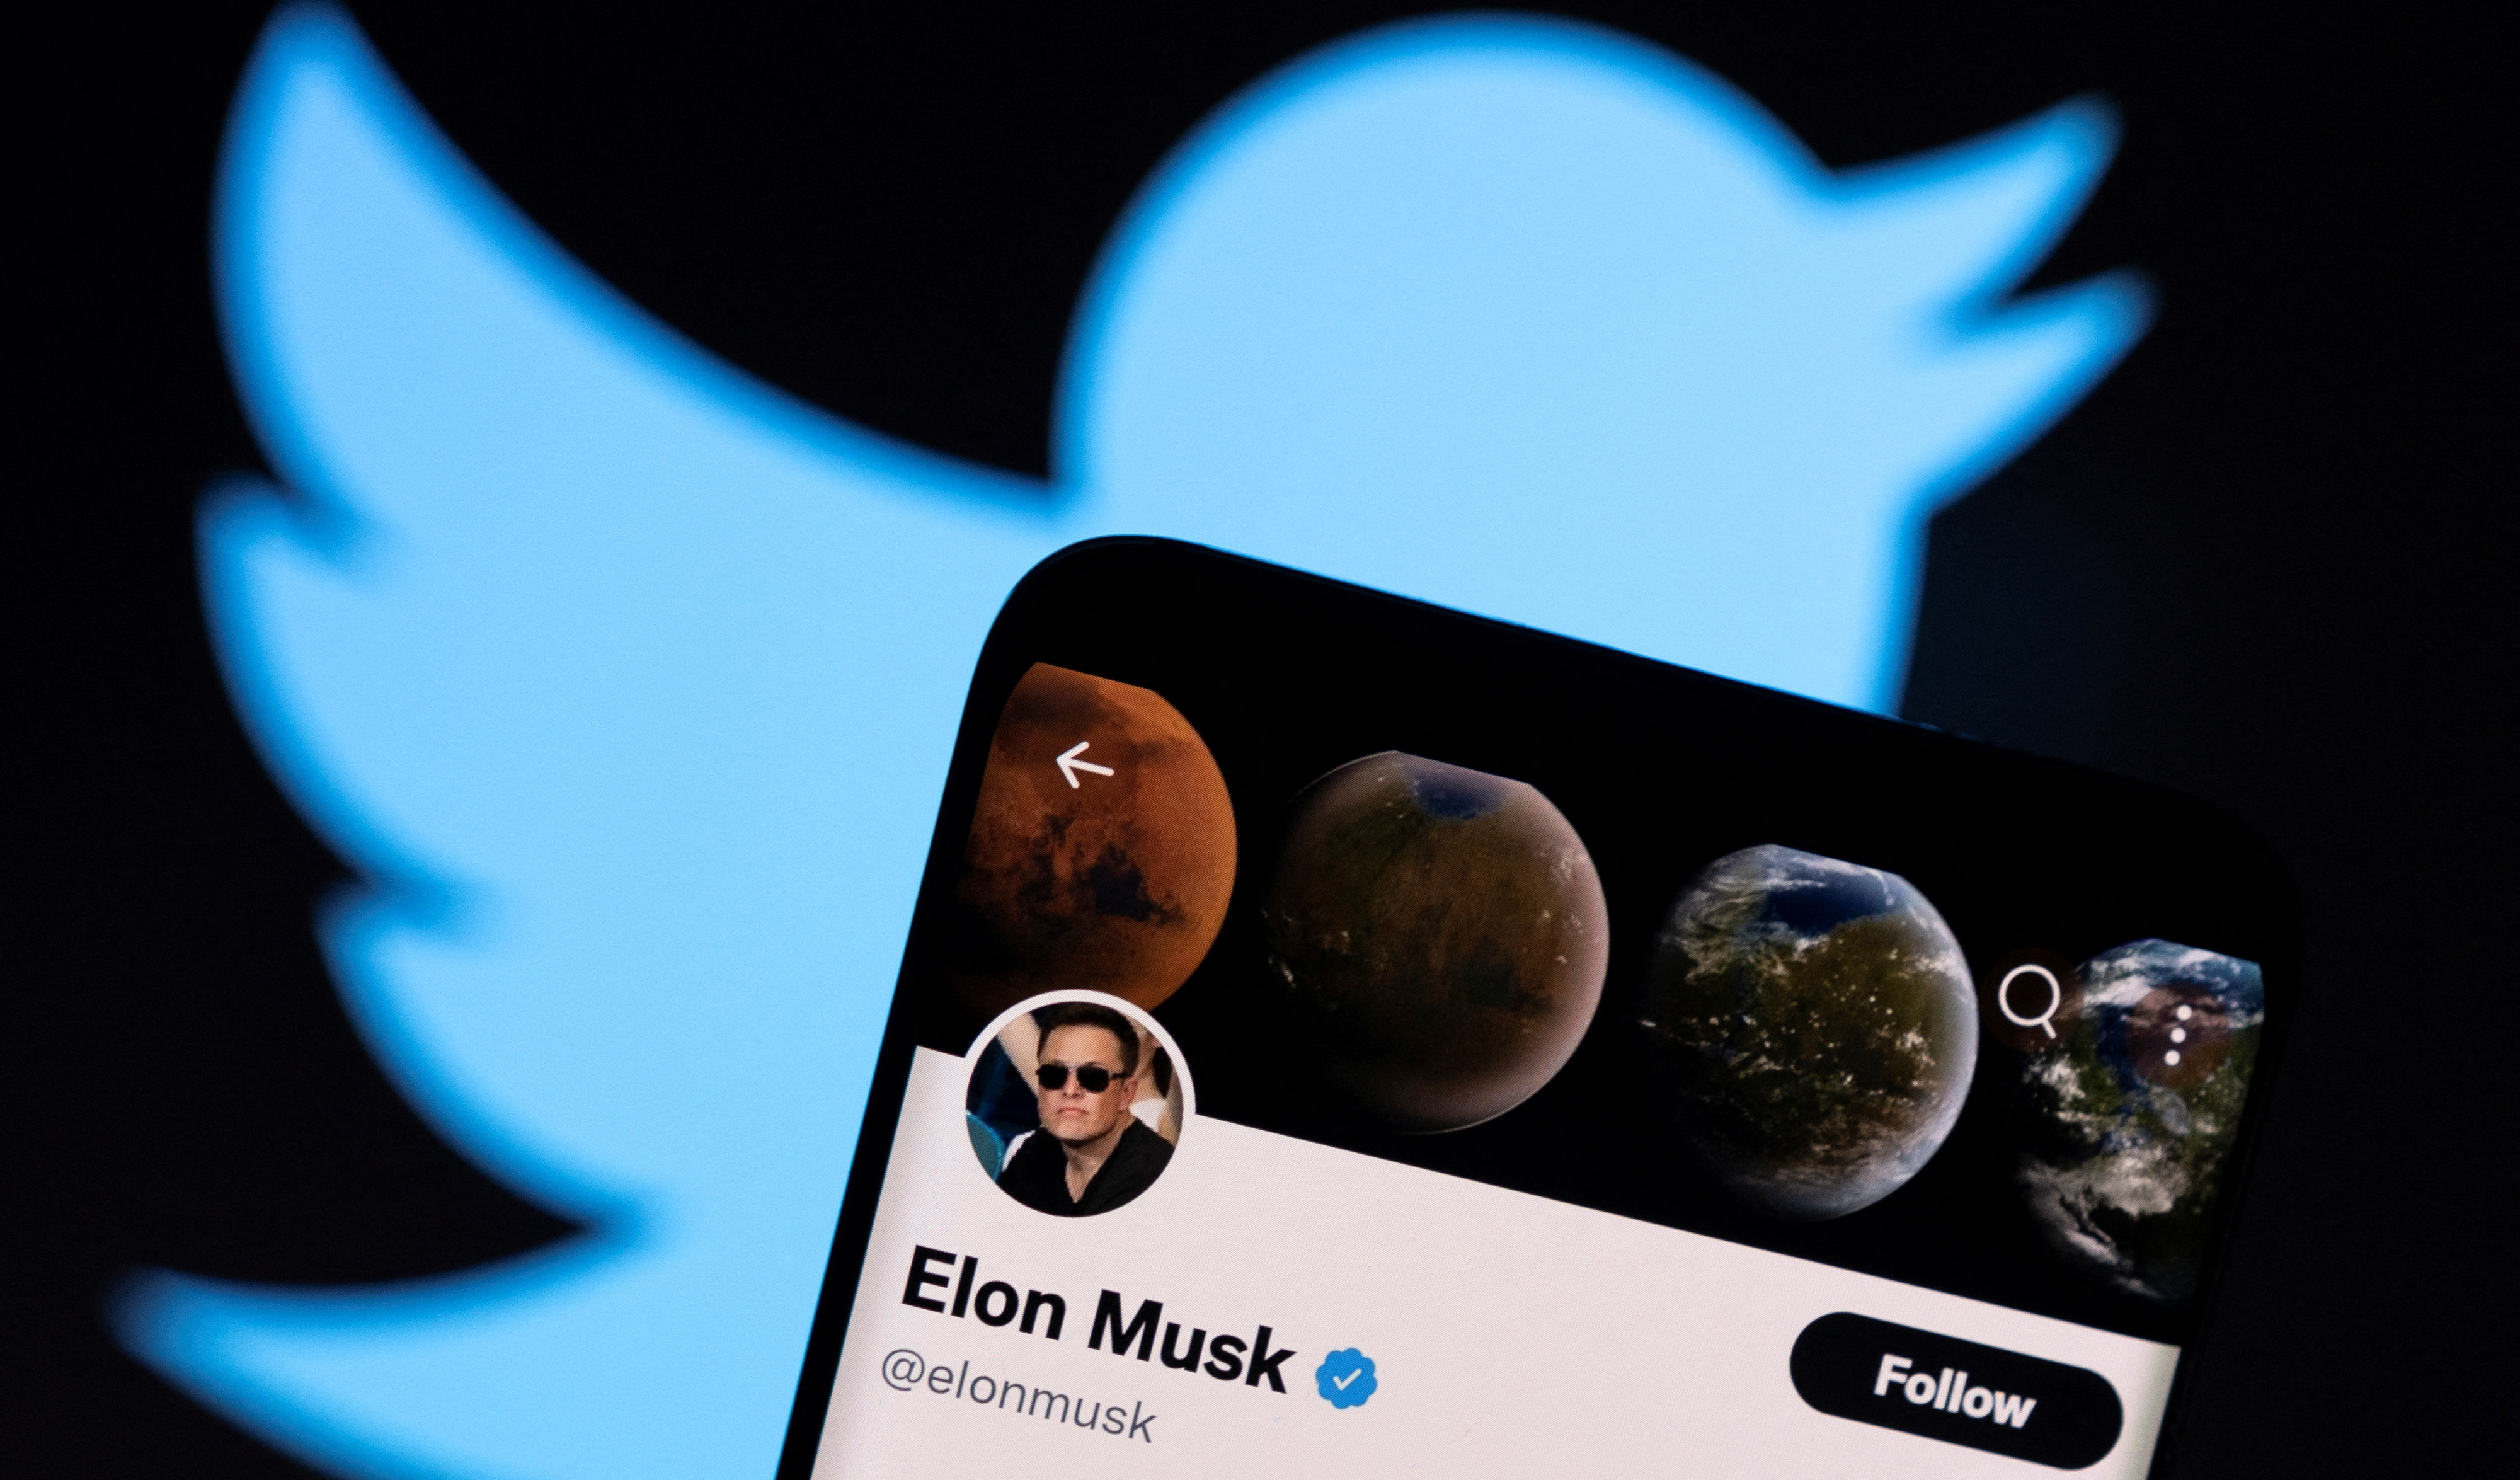 A photo illustration shows Elon Musk's twitter account and the Twitter logo